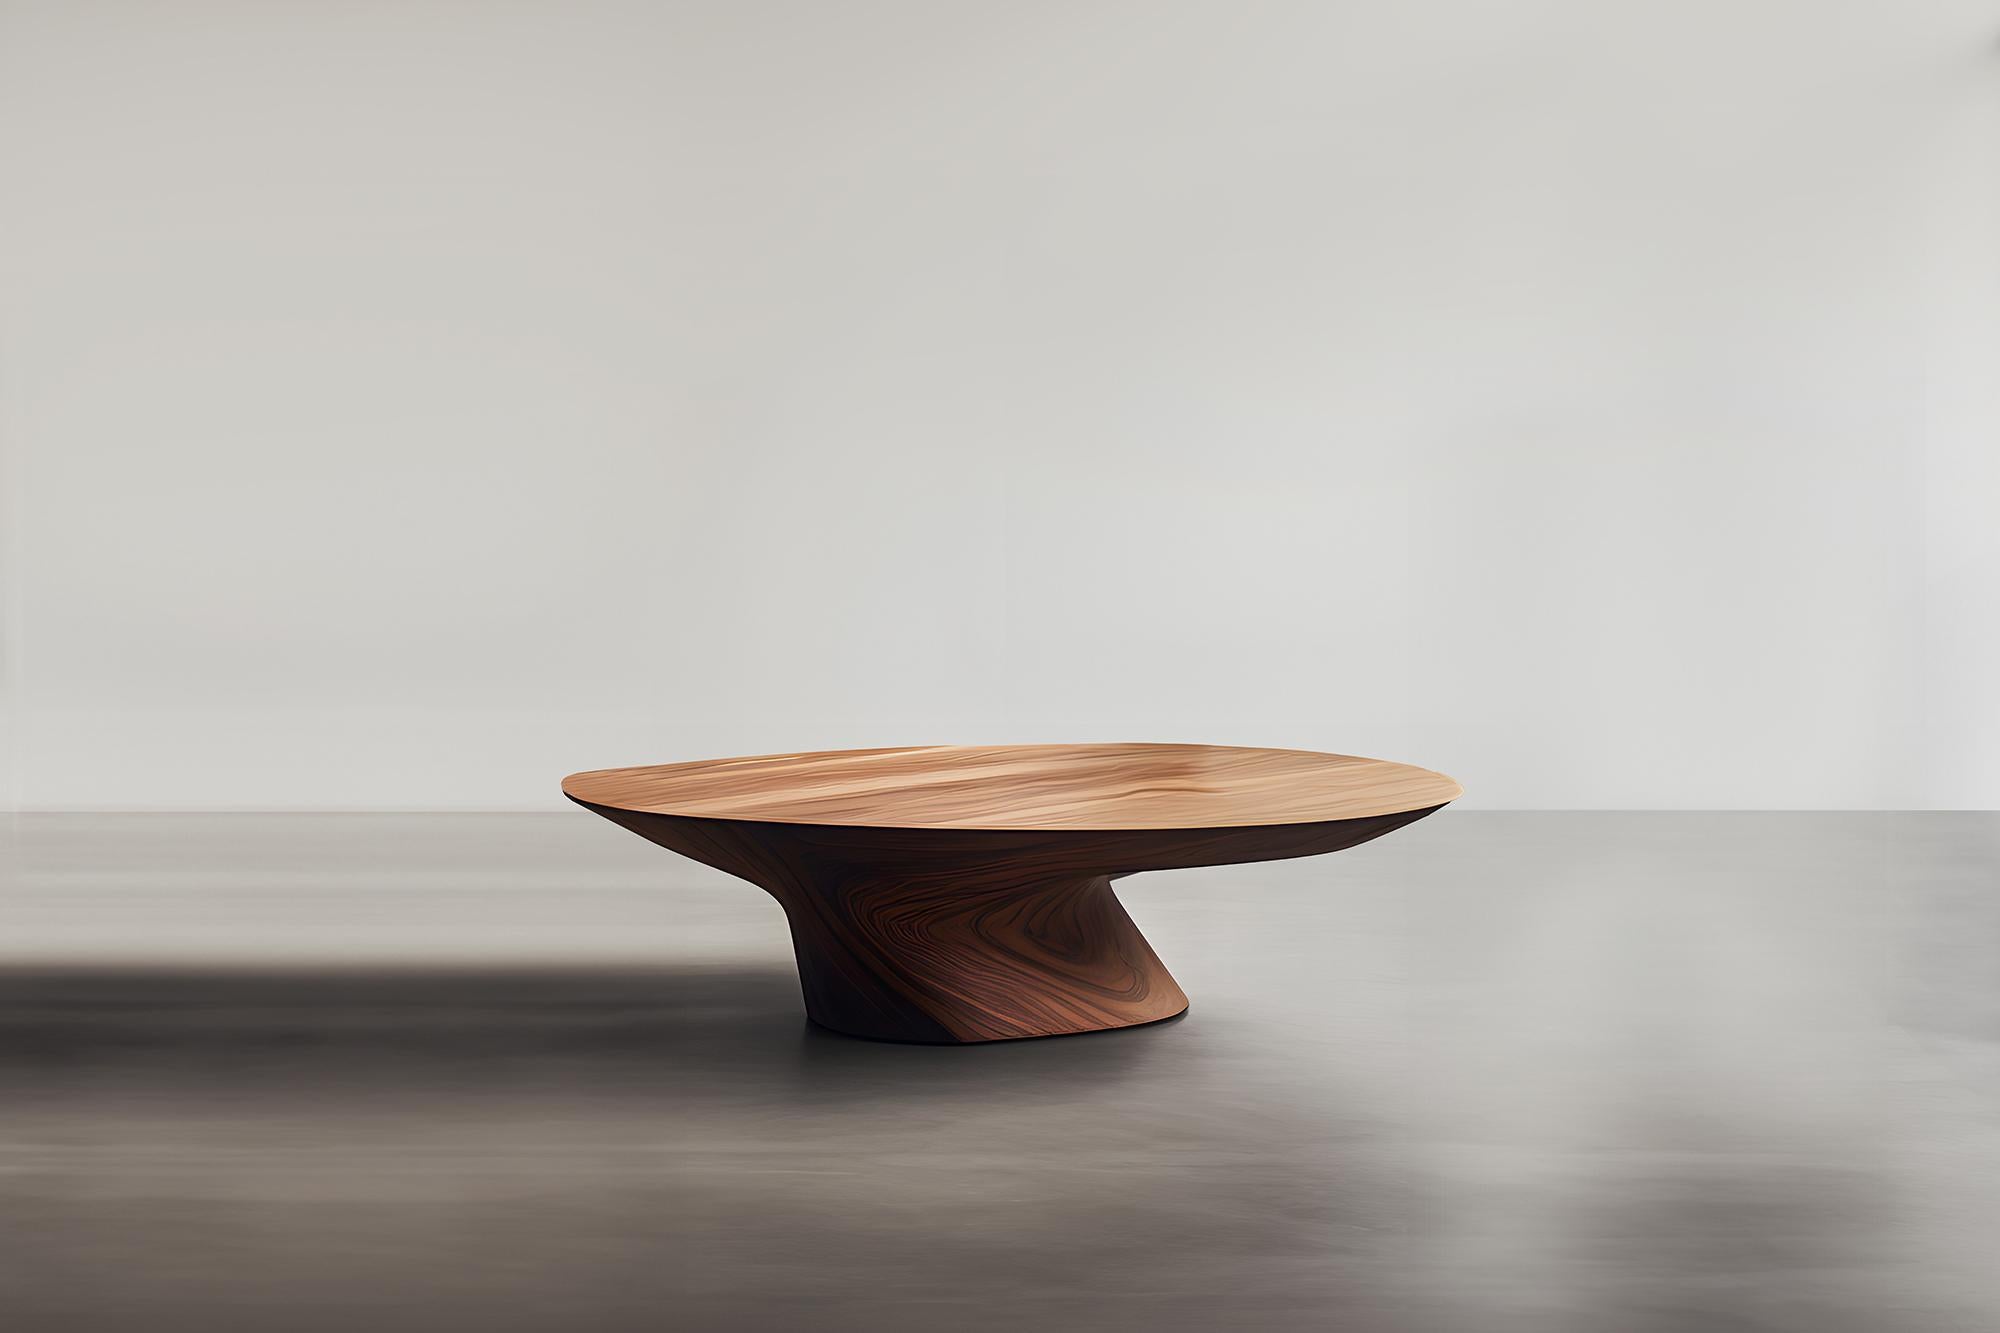 Sculptural Coffee Table Made of Solid Wood, Center Table Solace S47  by Joel Escalona


The Solace table series, designed by Joel Escalona, is a furniture collection that exudes balance and presence, thanks to its sensuous, dense, and irregular